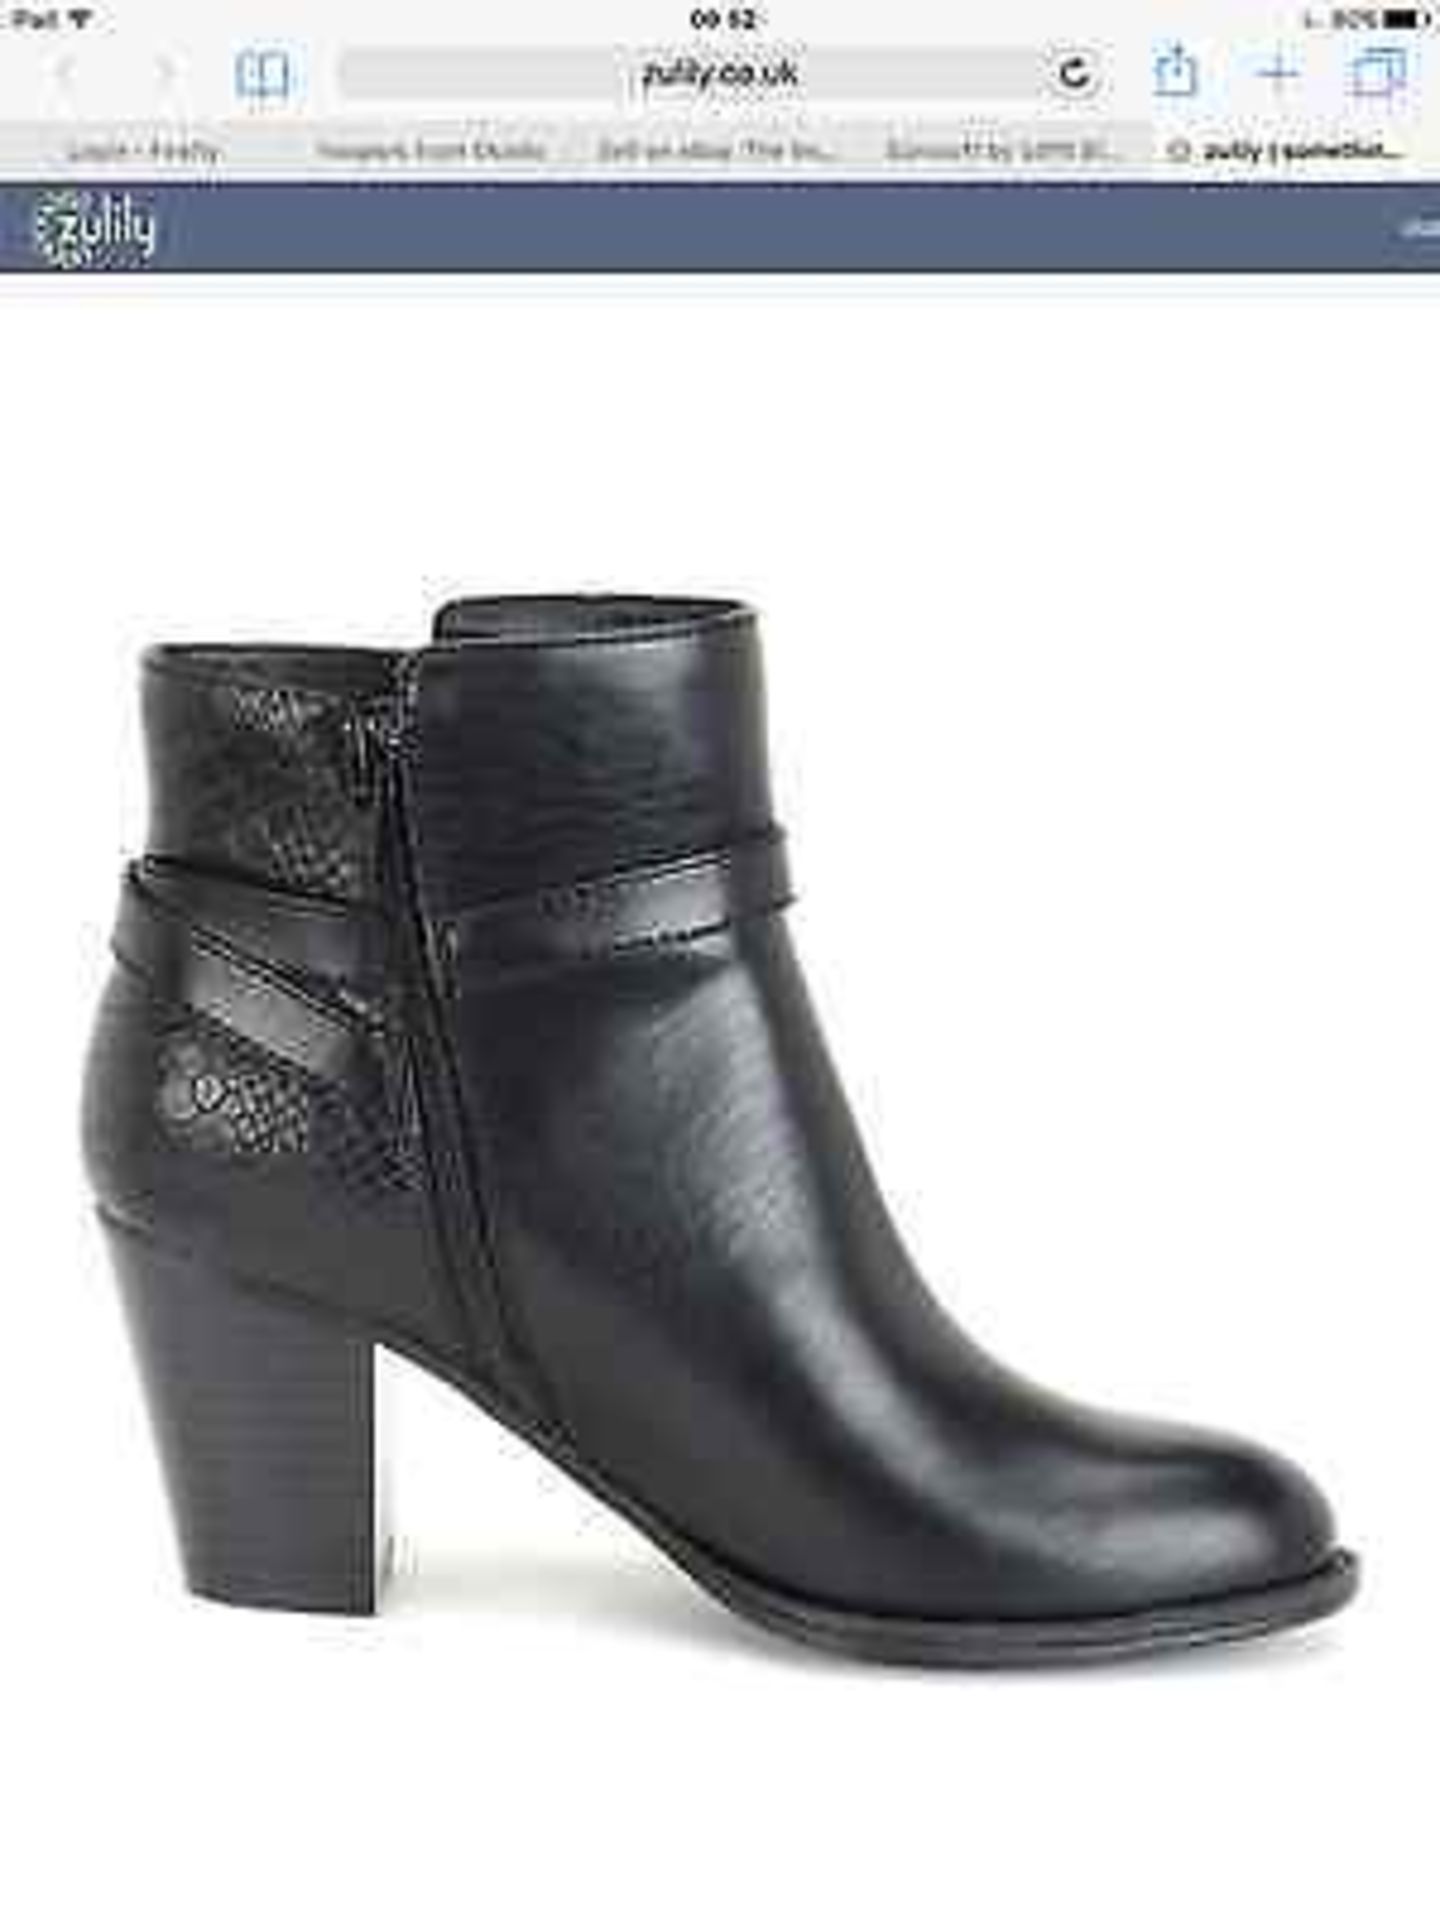 Euro Soft Black Sigourney Ankle Boot, Size EUR 38 (New with box) [Ref: ] - Image 3 of 5